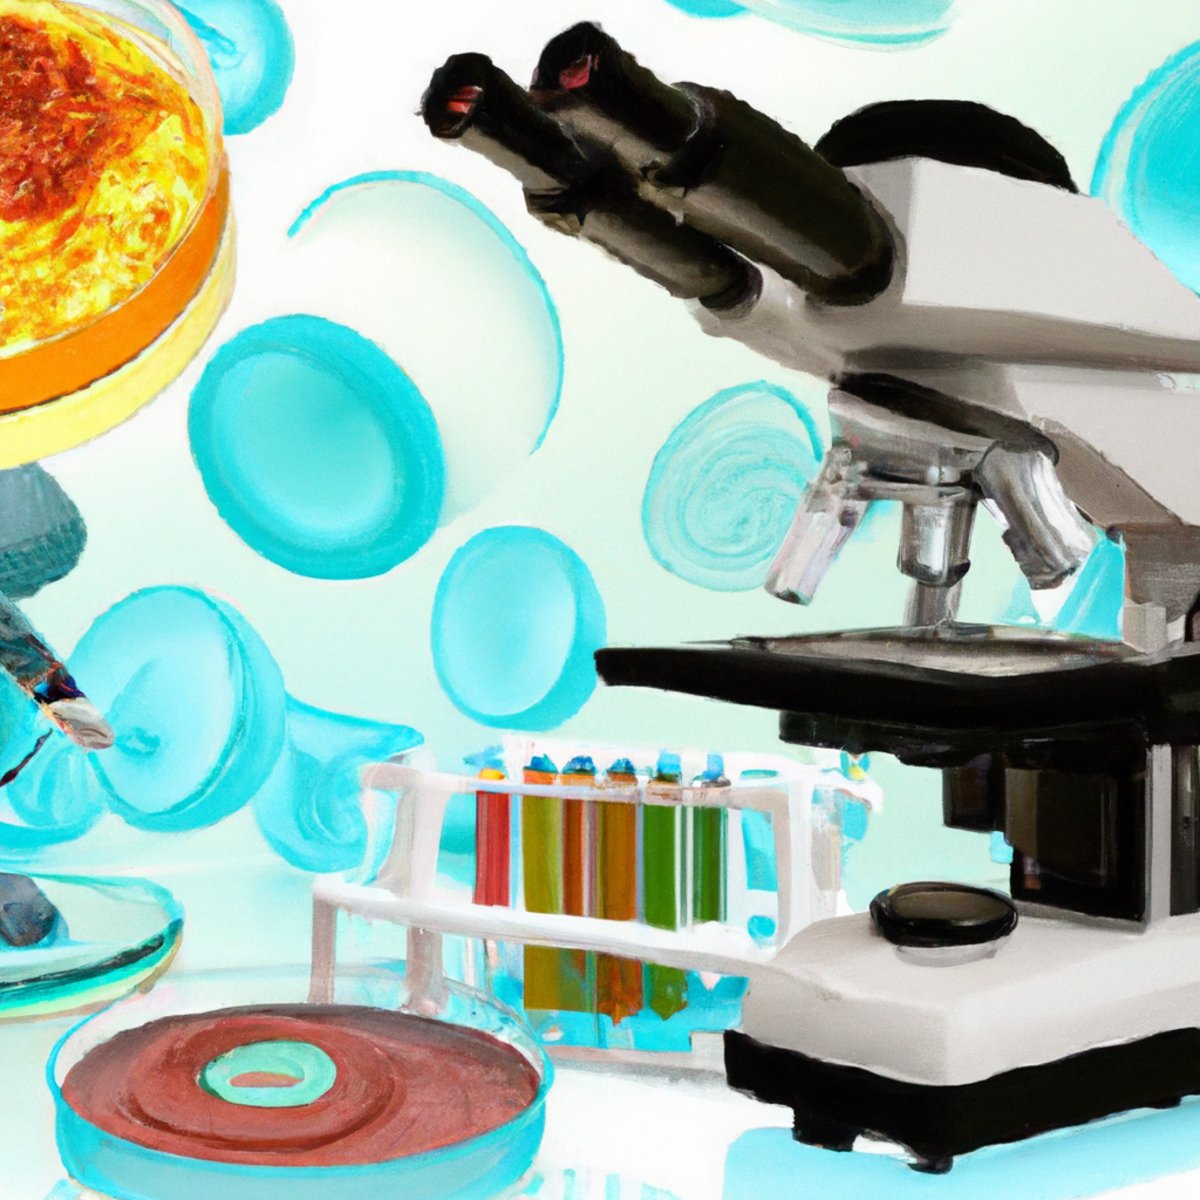 Scientific laboratory with instruments and equipment, highlighting genetic research for understanding Progressive Familial Intrahepatic Cholestasis (PFIC).